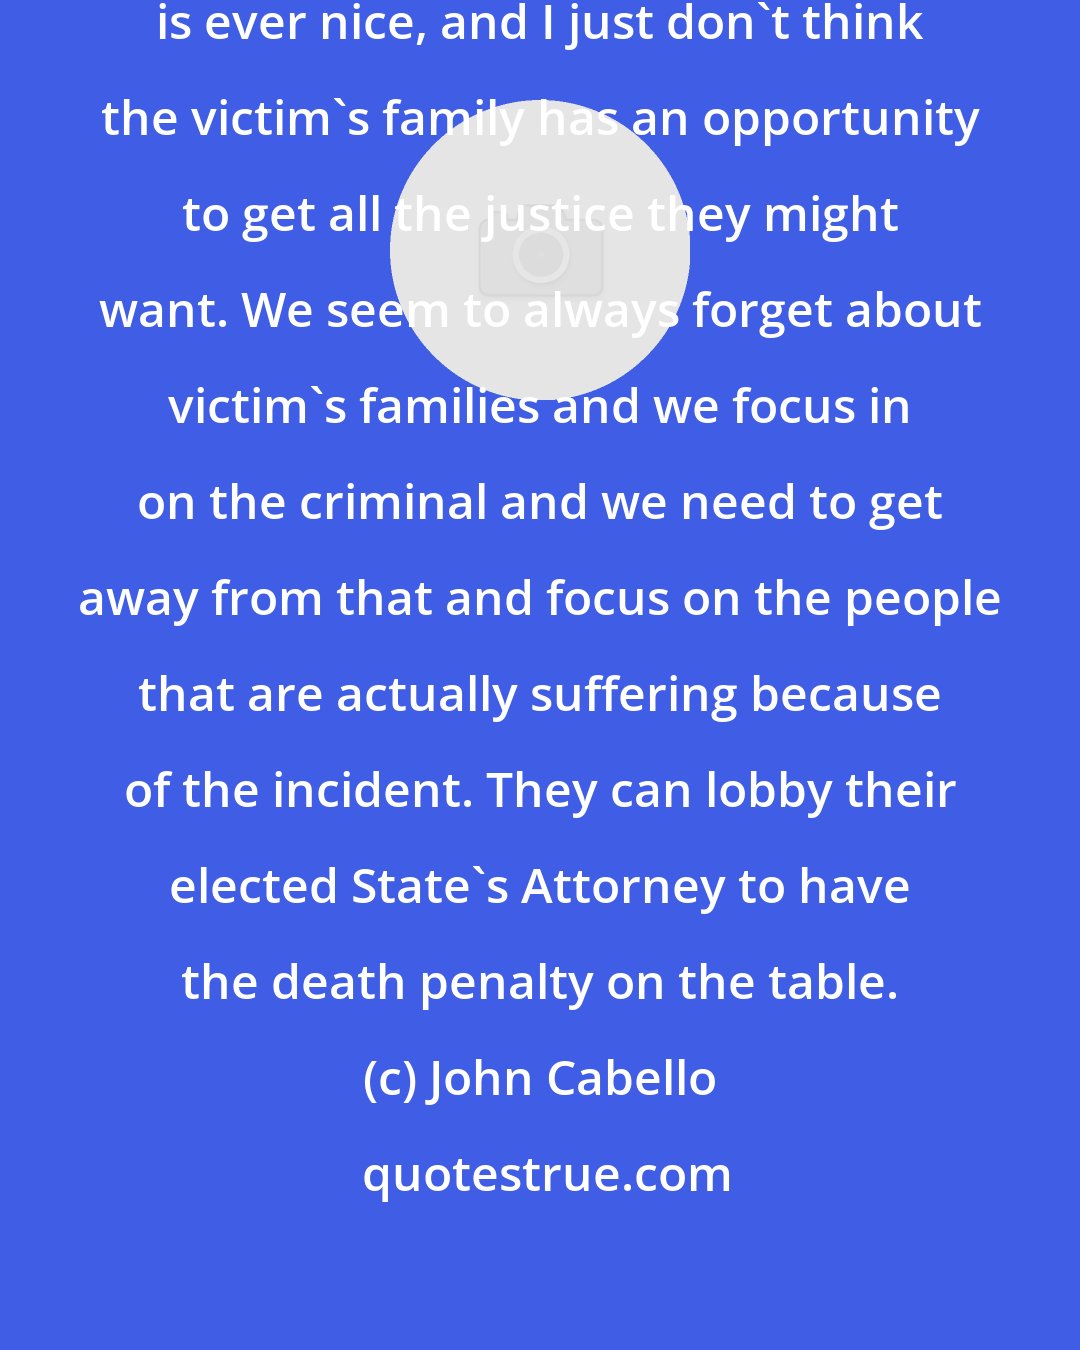 John Cabello: I've seen lots of murders, no murder is ever nice, and I just don't think the victim's family has an opportunity to get all the justice they might want. We seem to always forget about victim's families and we focus in on the criminal and we need to get away from that and focus on the people that are actually suffering because of the incident. They can lobby their elected State's Attorney to have the death penalty on the table.